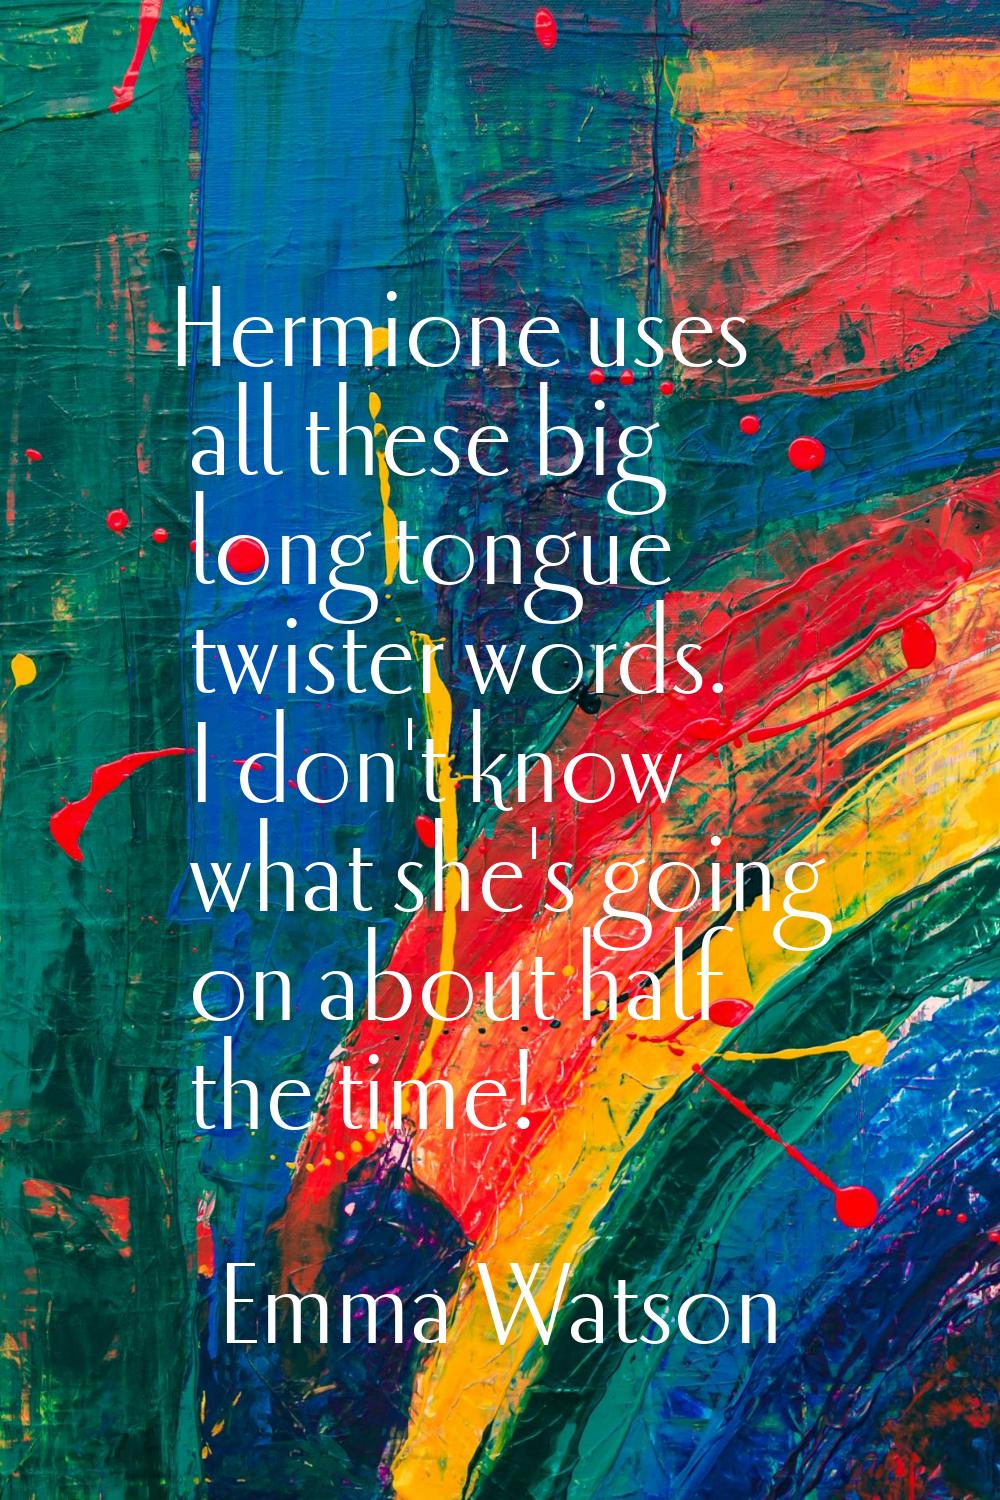 Hermione uses all these big long tongue twister words. I don't know what she's going on about half 